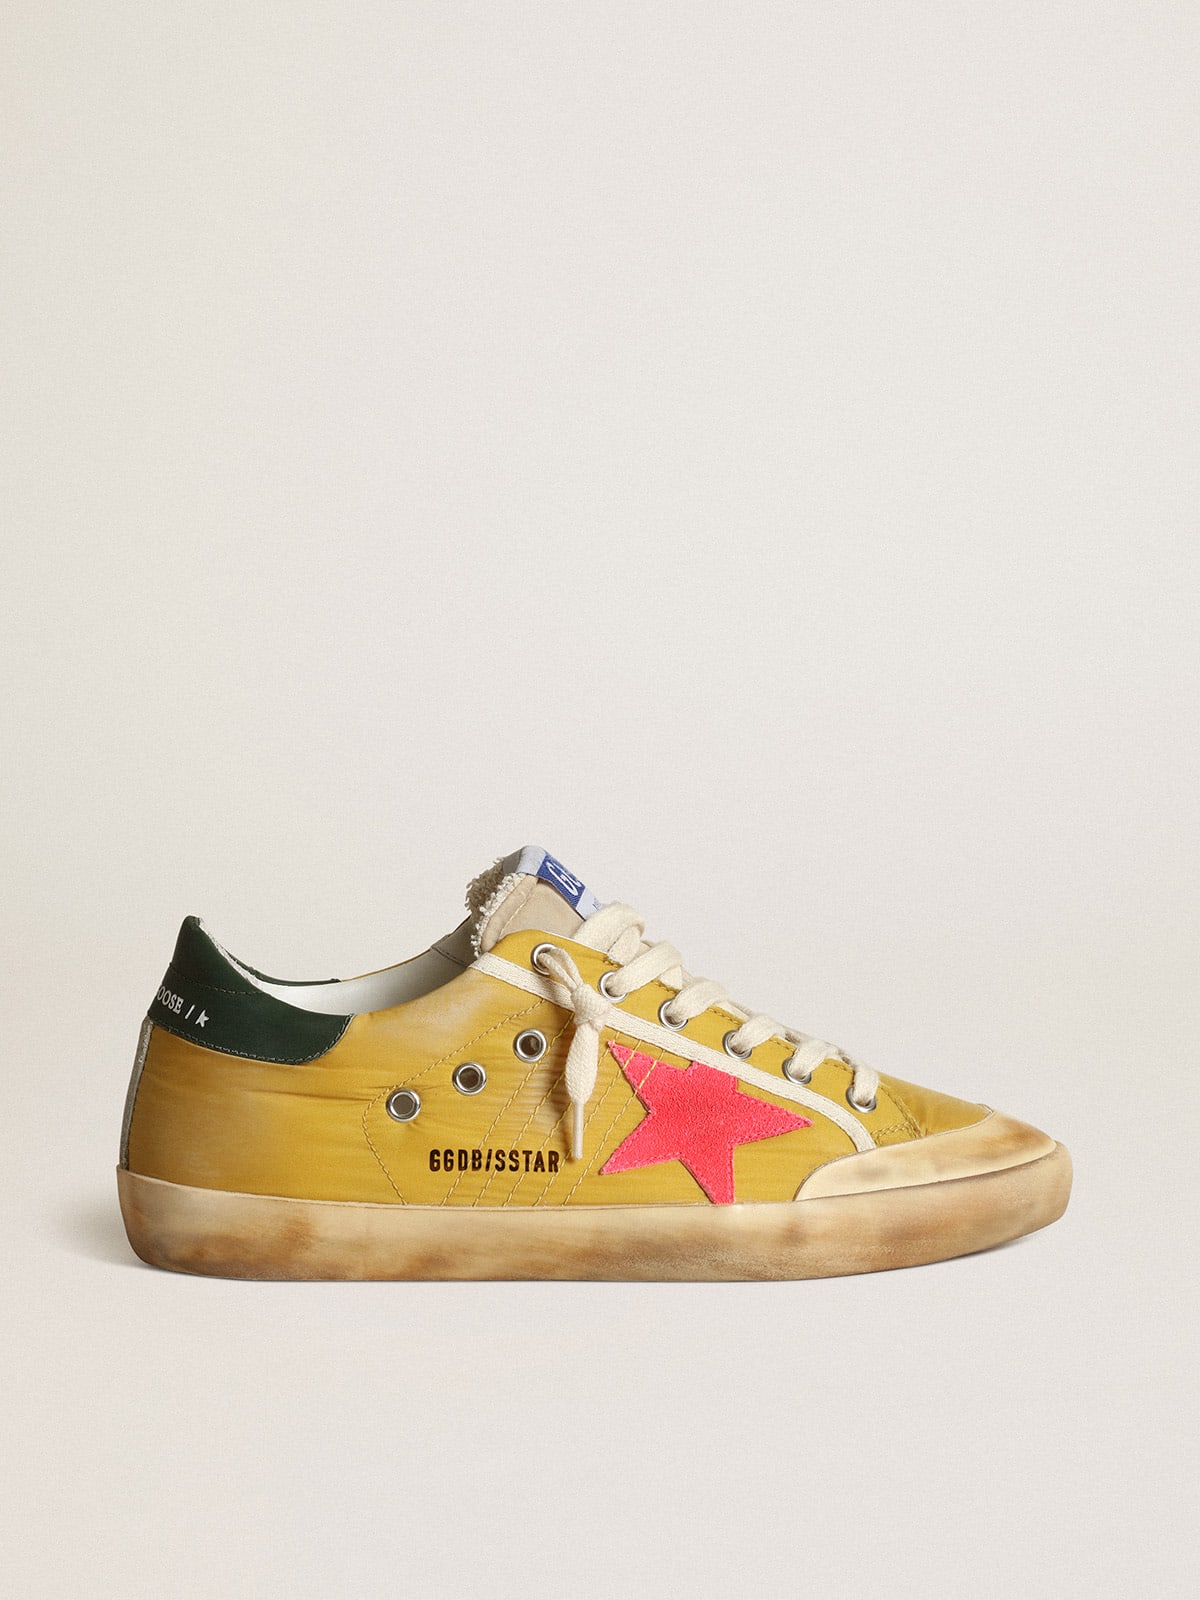 Super-Star Penstar sneakers in mustard-colored nylon with fluorescent lobster-colored suede star